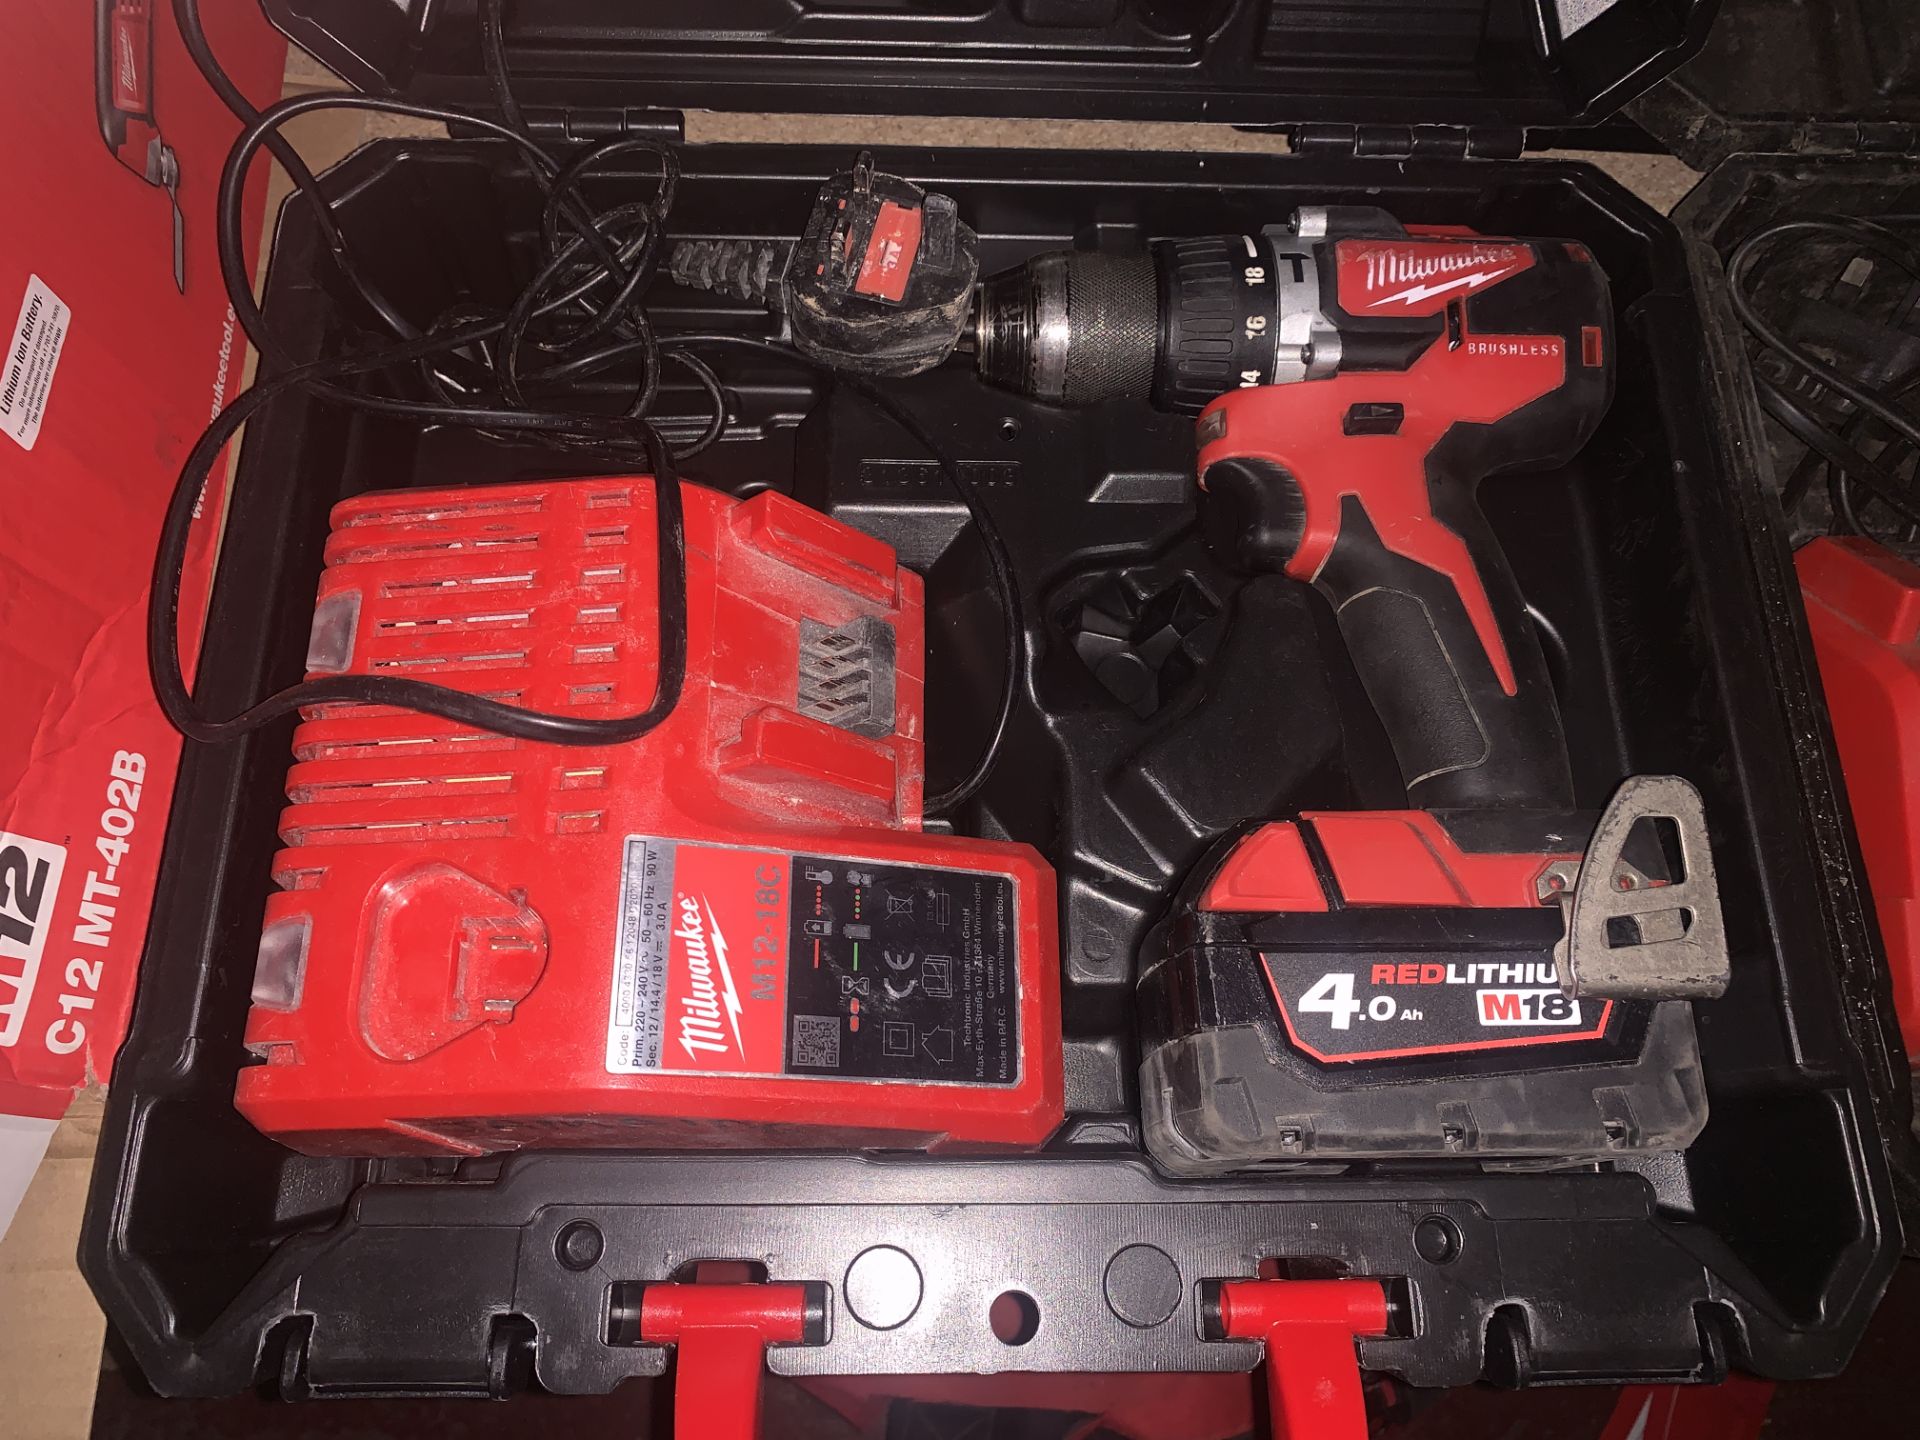 MILWAUKEE M18 CBLPD-402C 18V 4.0AH LI-ION REDLITHIUM BRUSHLESS CORDLESS COMBI DRILL COMES WITH